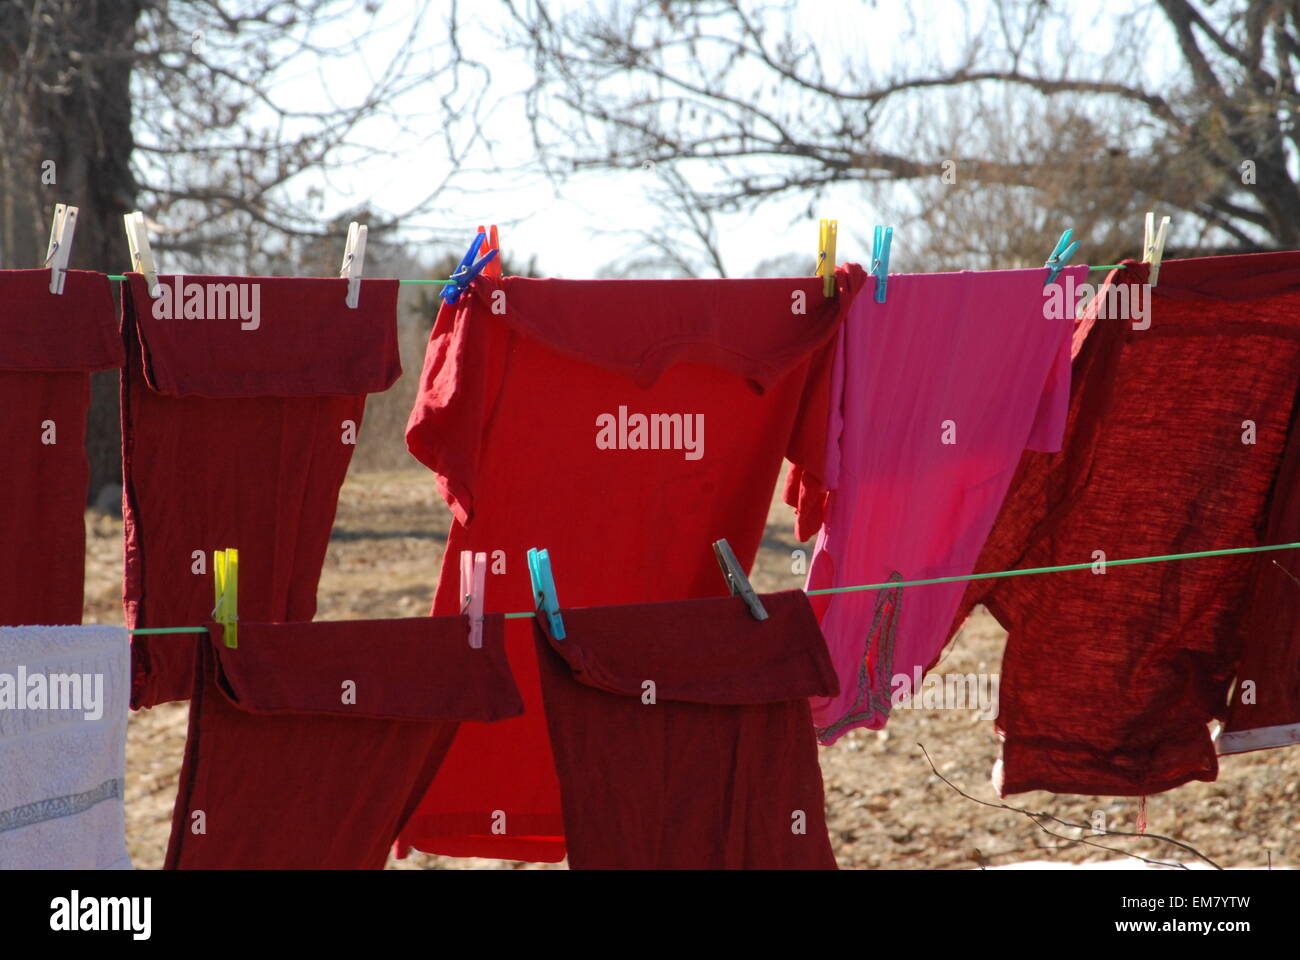 Red laundry drying in the wind. Stock Photo